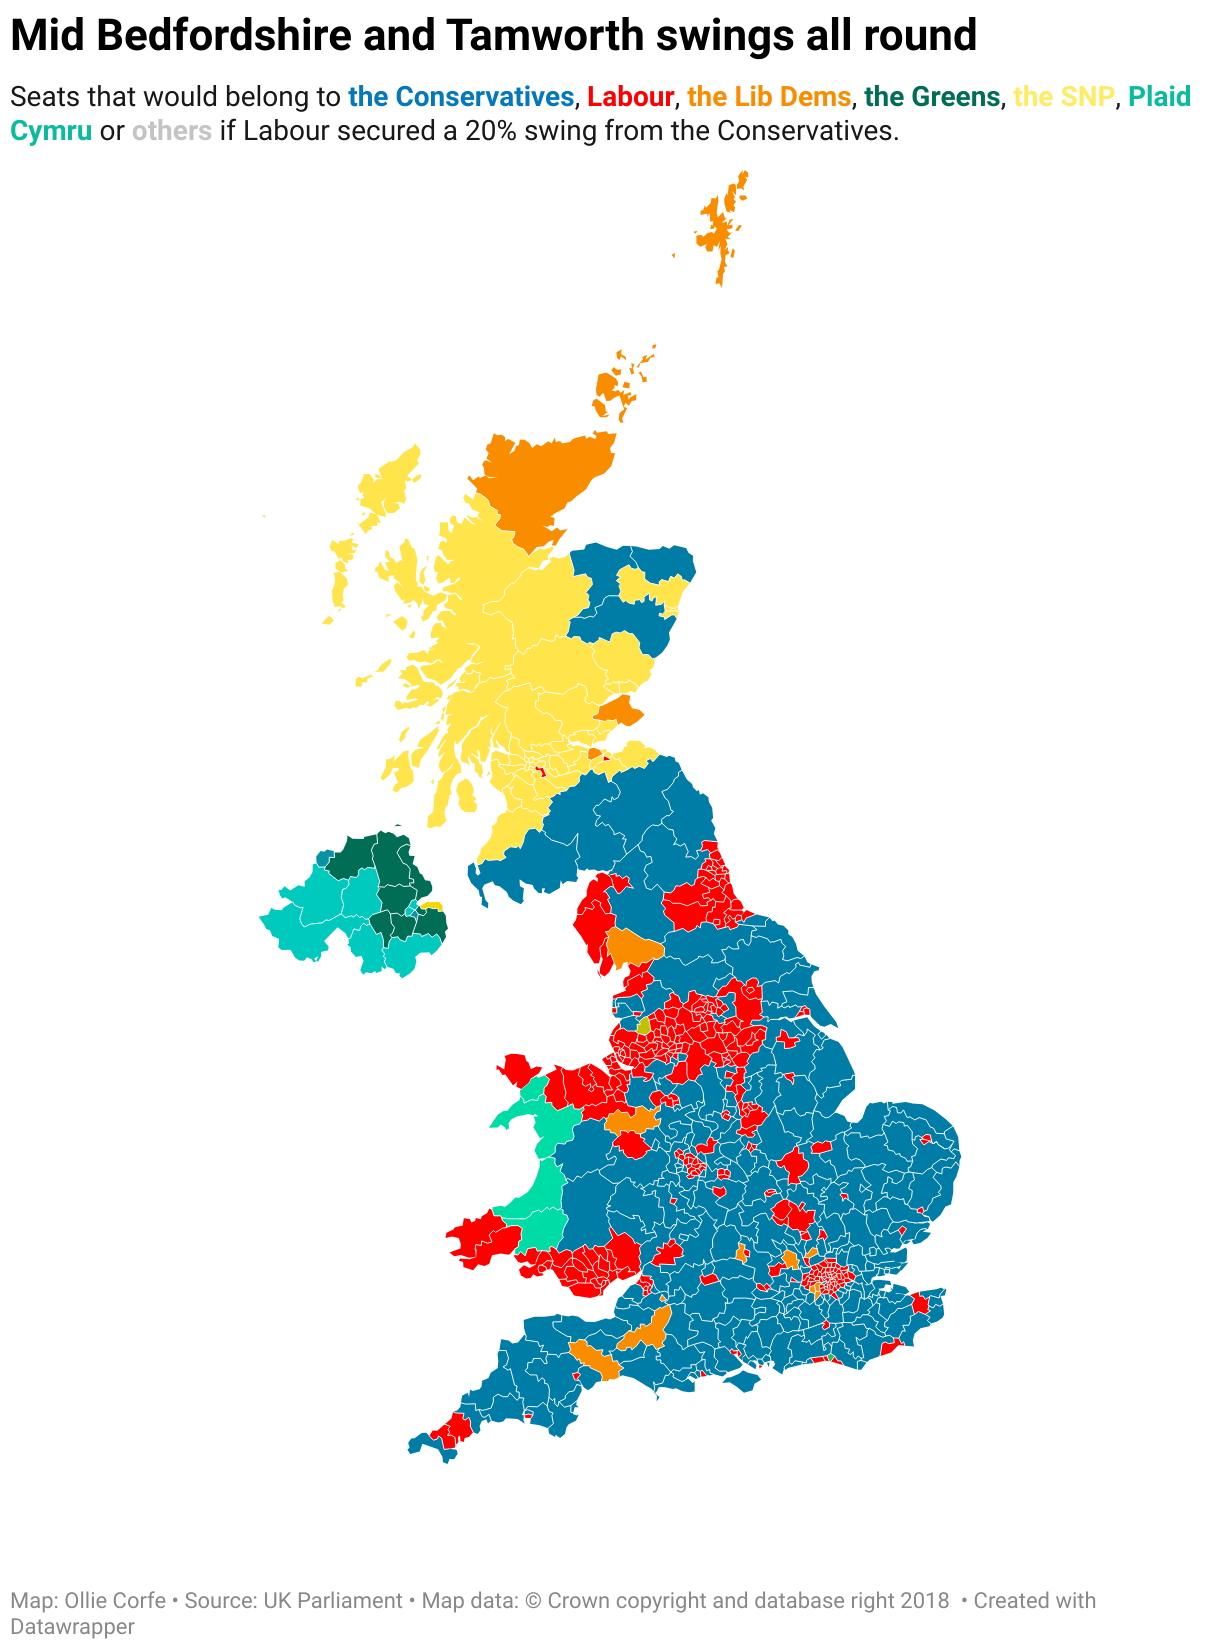 UK parliamentary constituencies map if Labour get 20% swing.